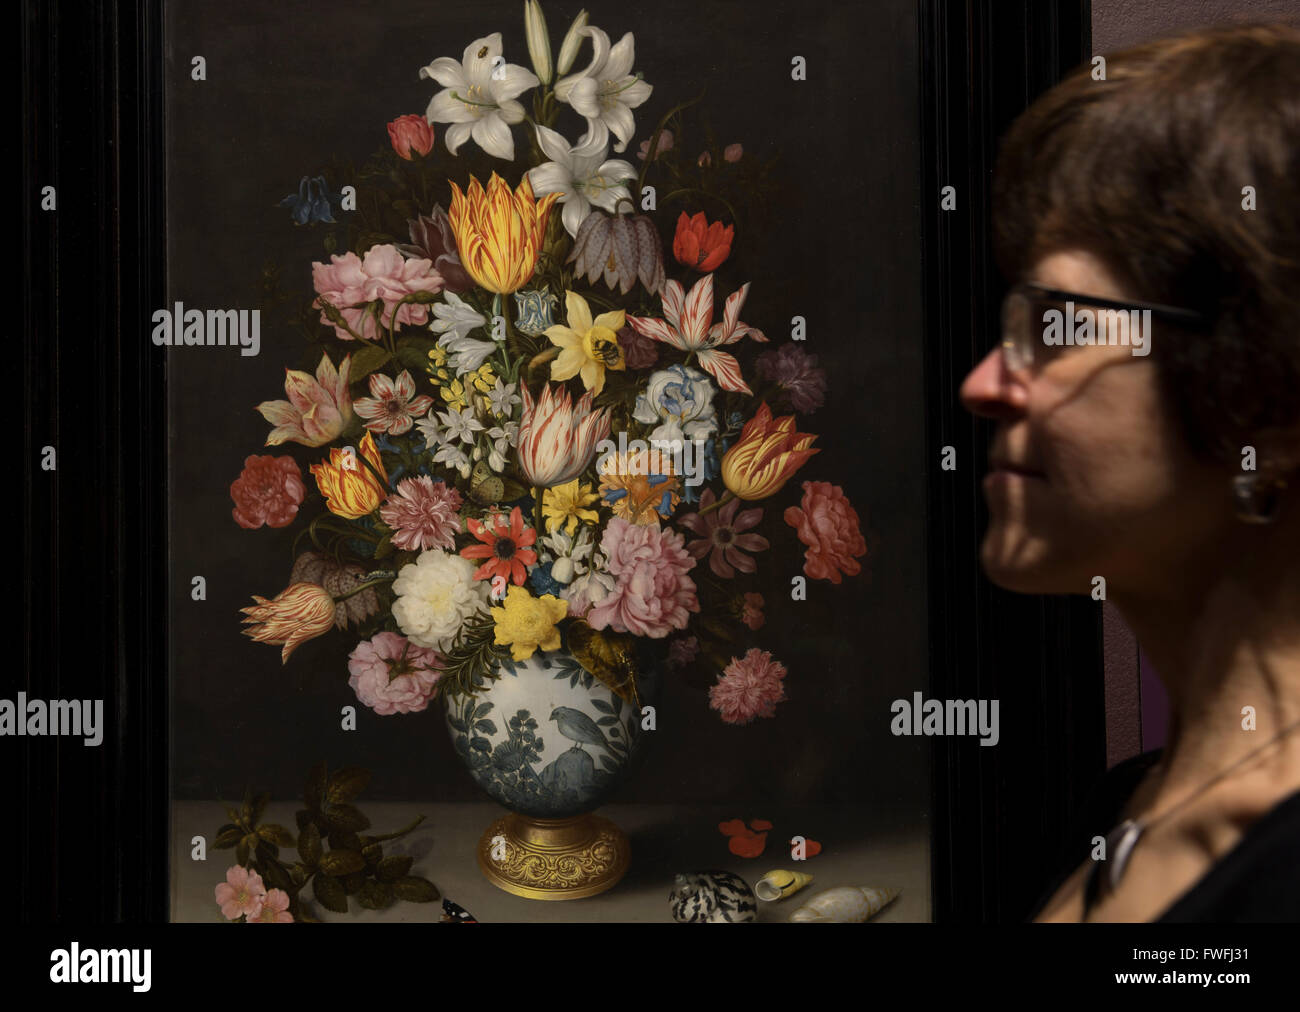 National Gallery, London, UK. 5th April, 2016. Betsy Wiseman, Curator of Dutch and Flemish Paintings, examines A Still Life of Flowers in a Wan-Li Vase on a Ledge by Ambrosius Bosschaert the Elder. Coinciding with the Chelsea Flower Show, this exhibition explores Dutch flower painting from the 17th to the late 18th century. Credit:  artsimages/Alamy Live News Stock Photo